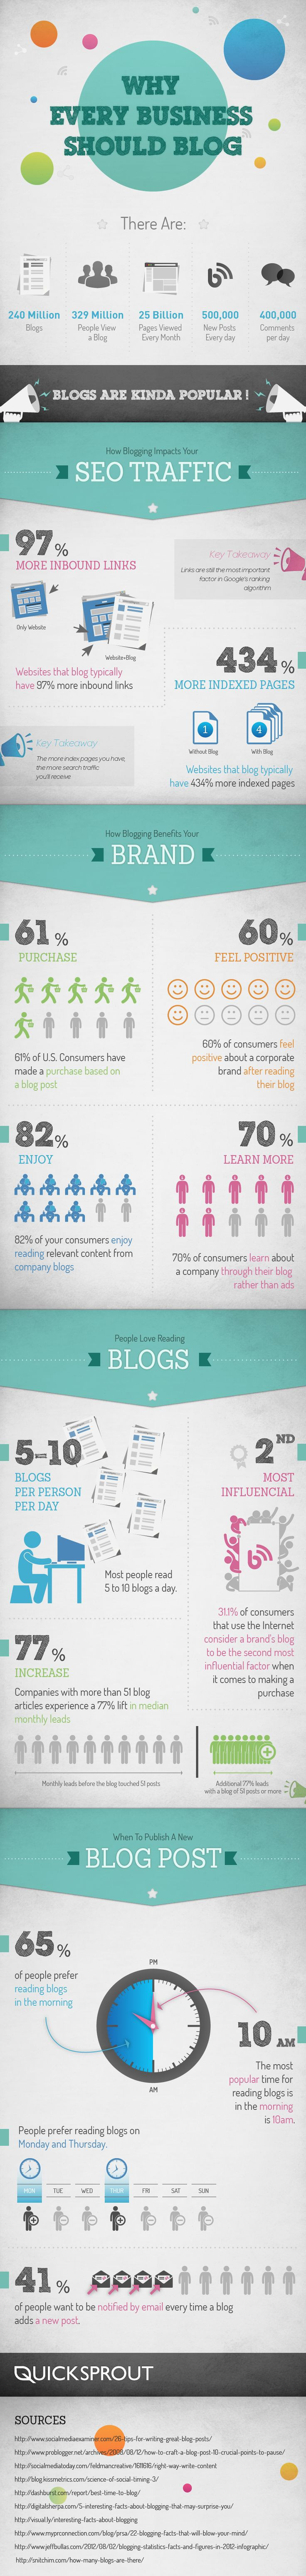 Why 98.3% Of Small Business Owners Should Blog In...